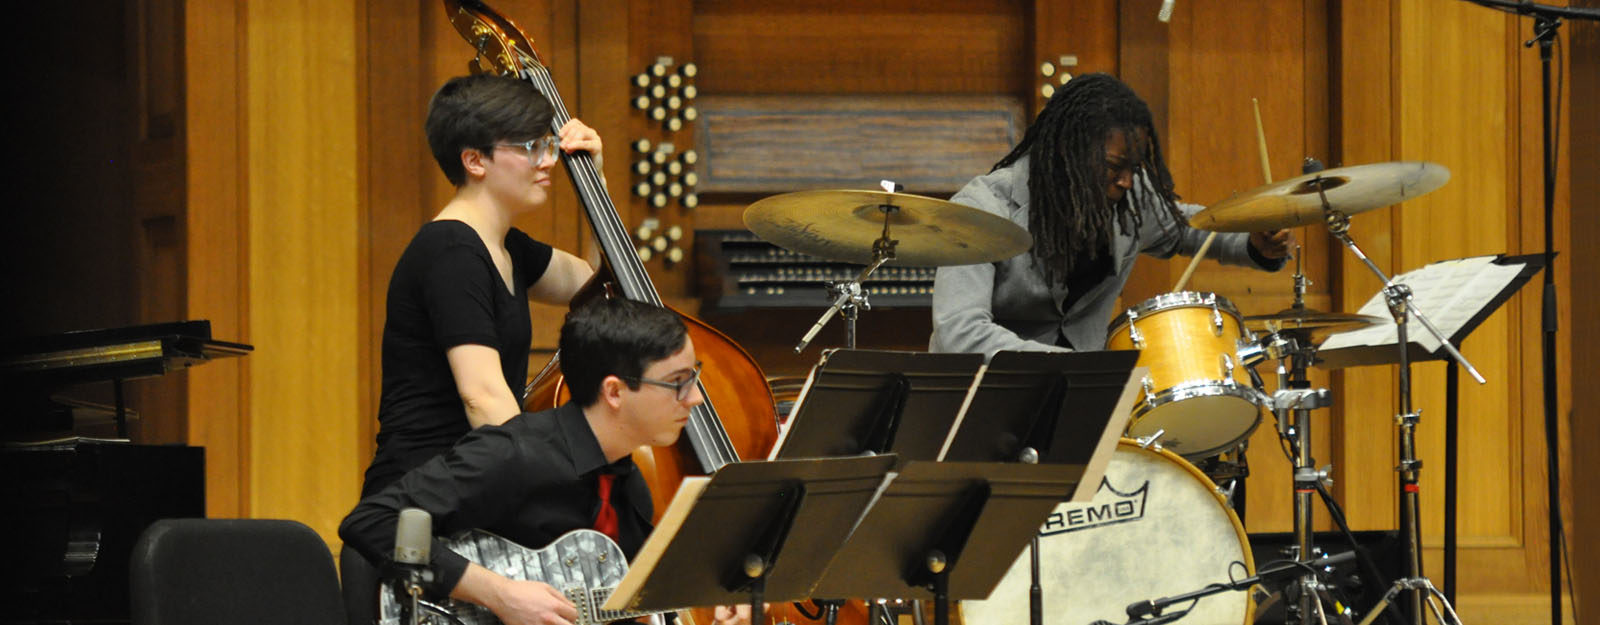 Members of the Lawrence Jazz Ensemble perform.